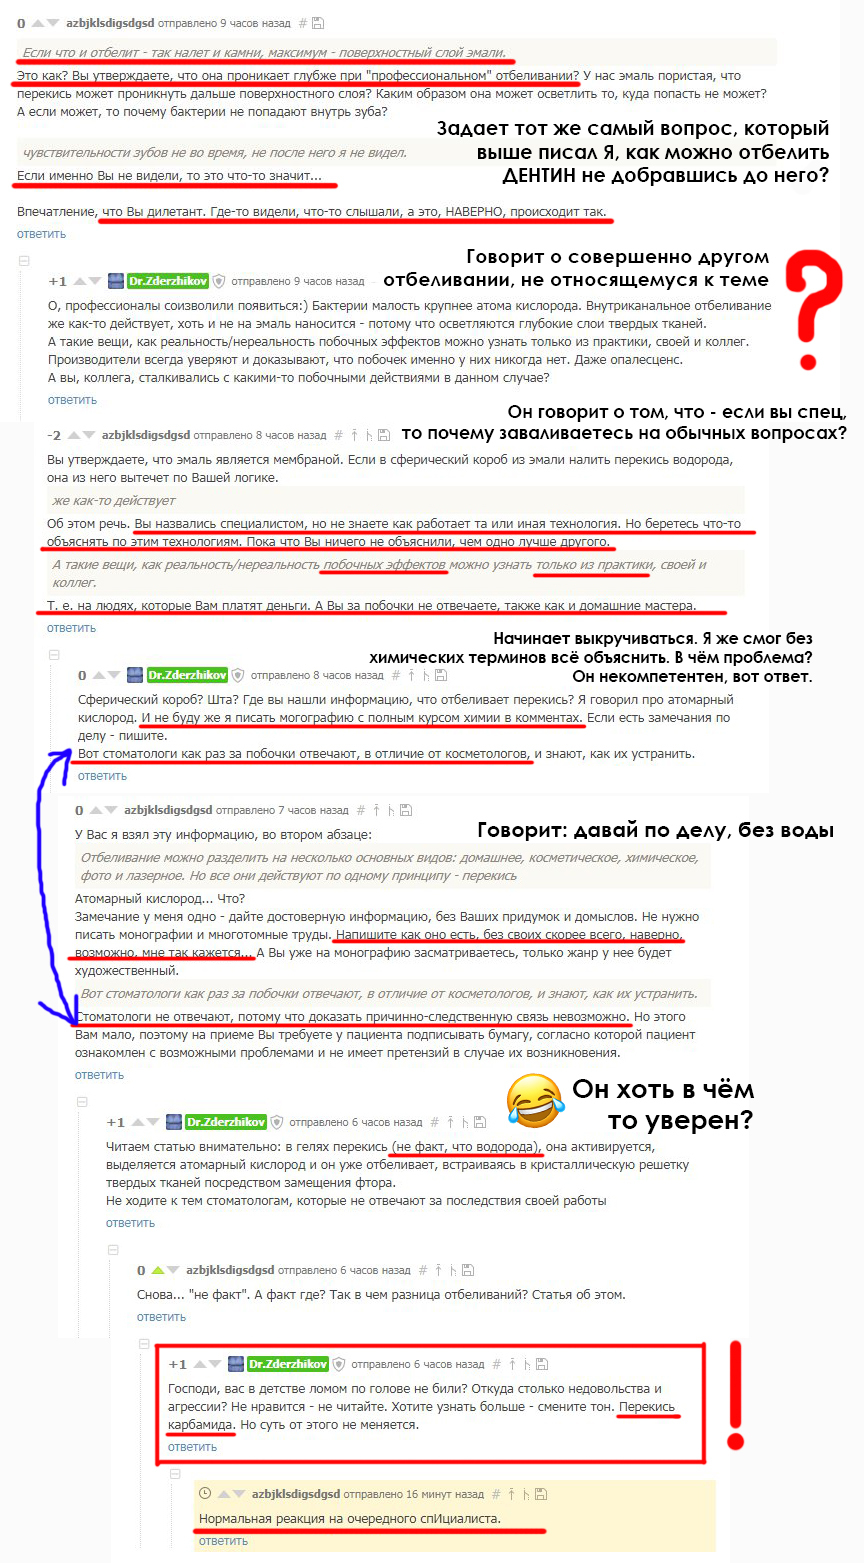 The hypocrisy of the kind Dr. Zderzhikov or the exposure of the incompetence of an orthopedic dentist - My, Dentistry, Teeth whitening, Exposure, Deception, Hypocrisy, Video, Longpost, No rating